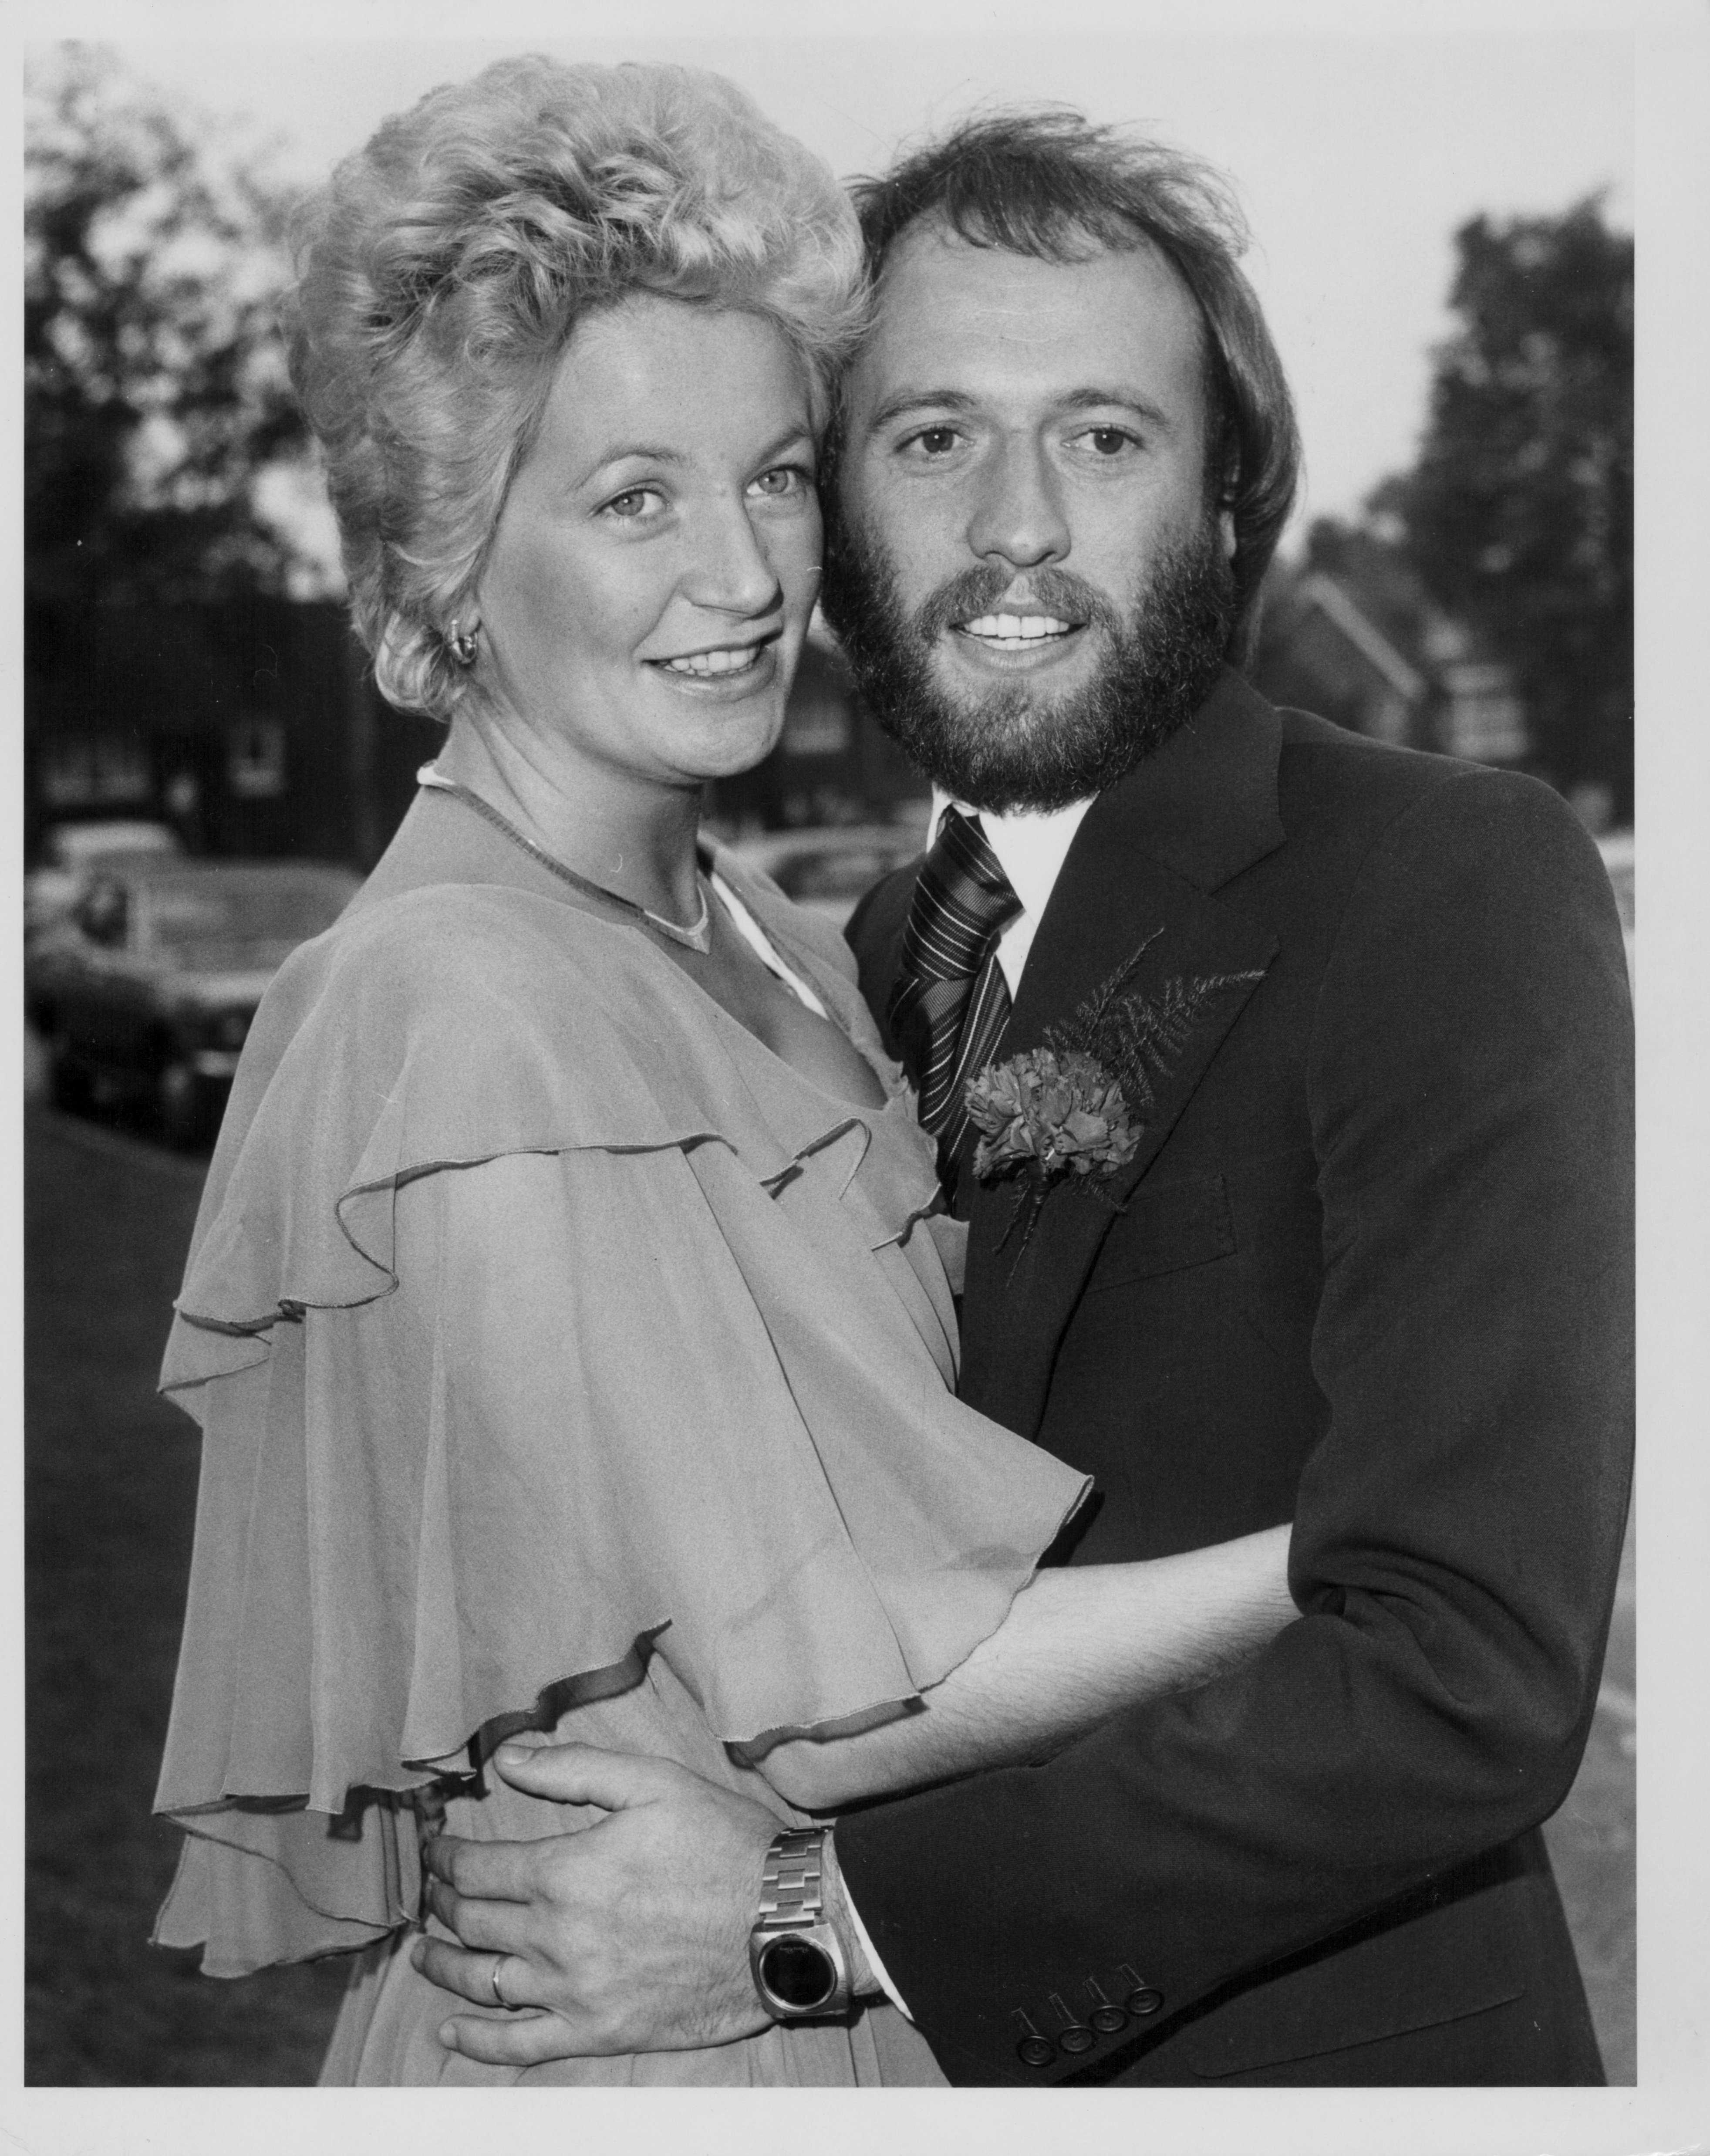 Maurice Gibb marrying Yvonne Spenceley at Haywards Heath Registry Office, Sussex, October 17th 1975. | Source: Getty Images